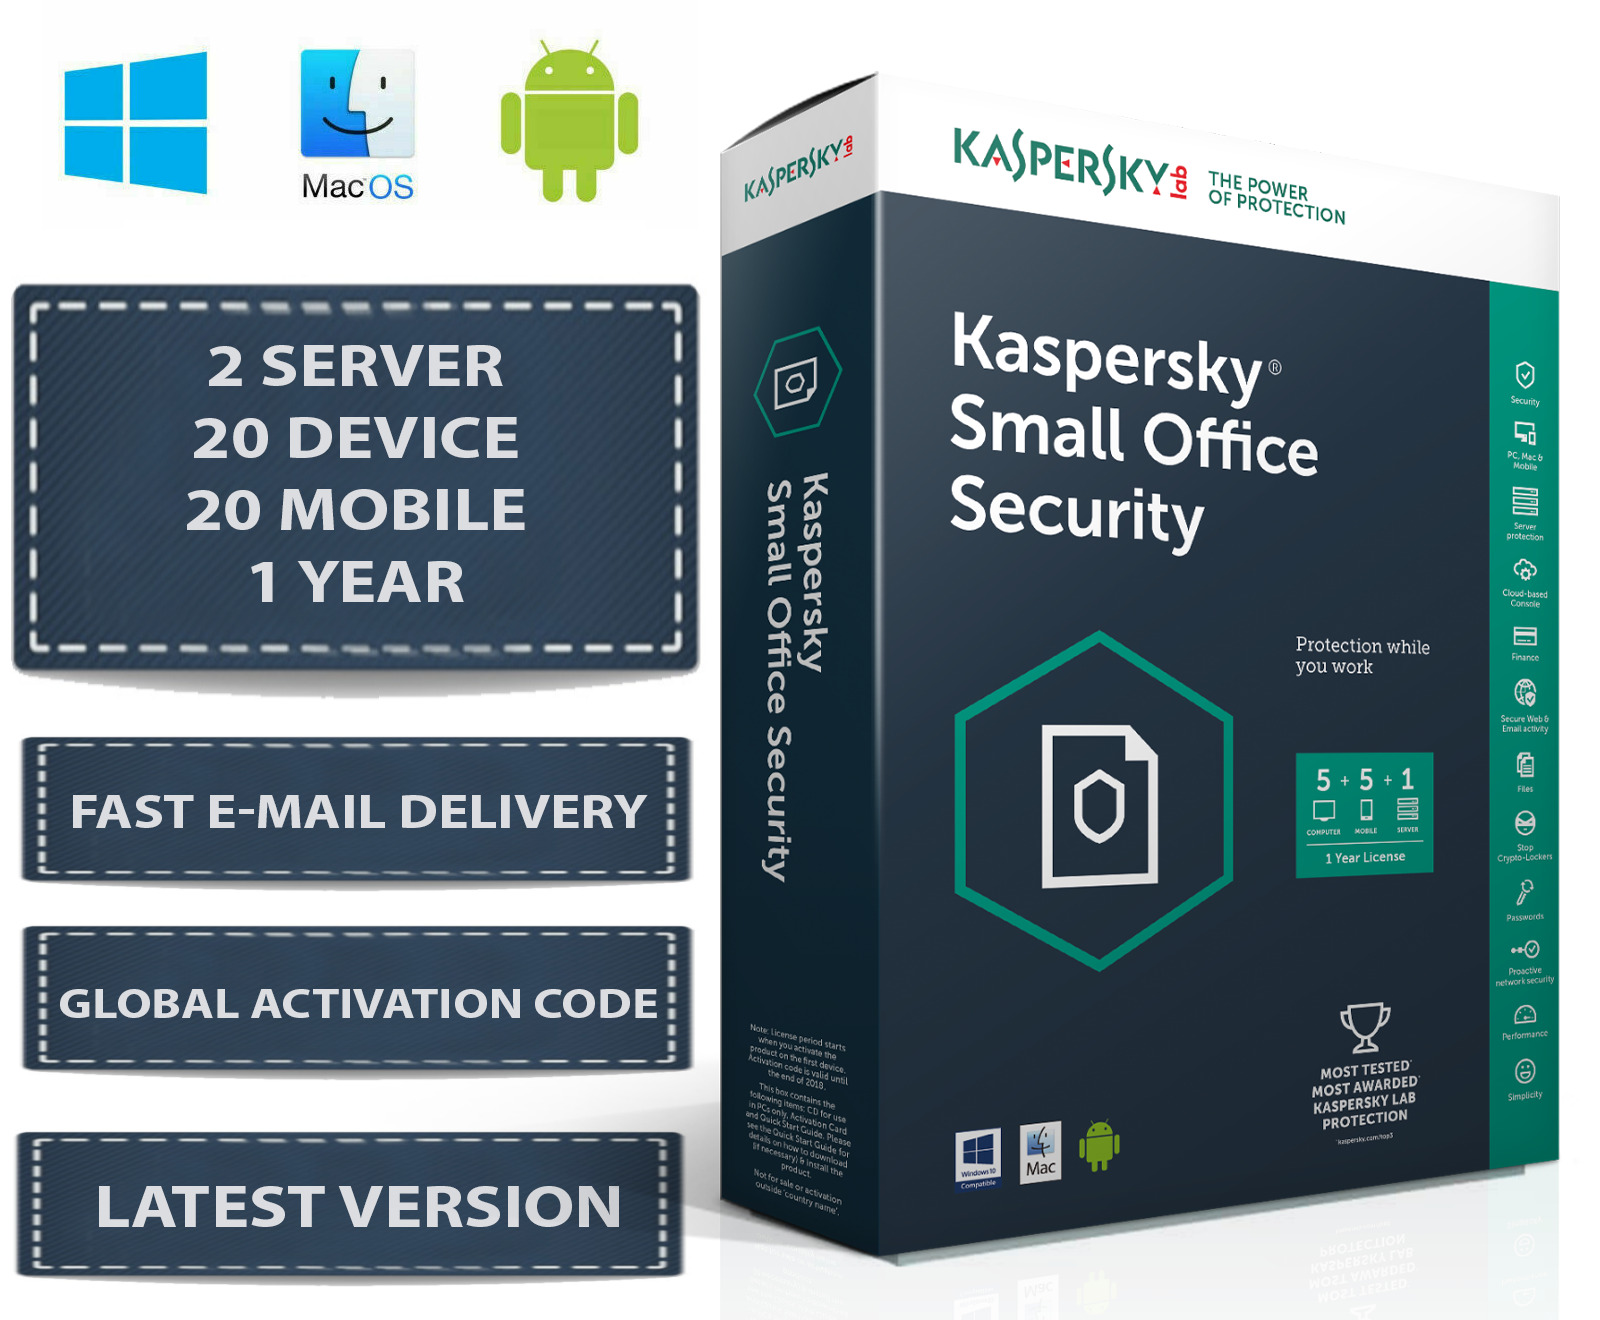 Kaspersky Small Office Security V8 2 Server 20 DEVICE + 20 MOBILE + 1 YEAR